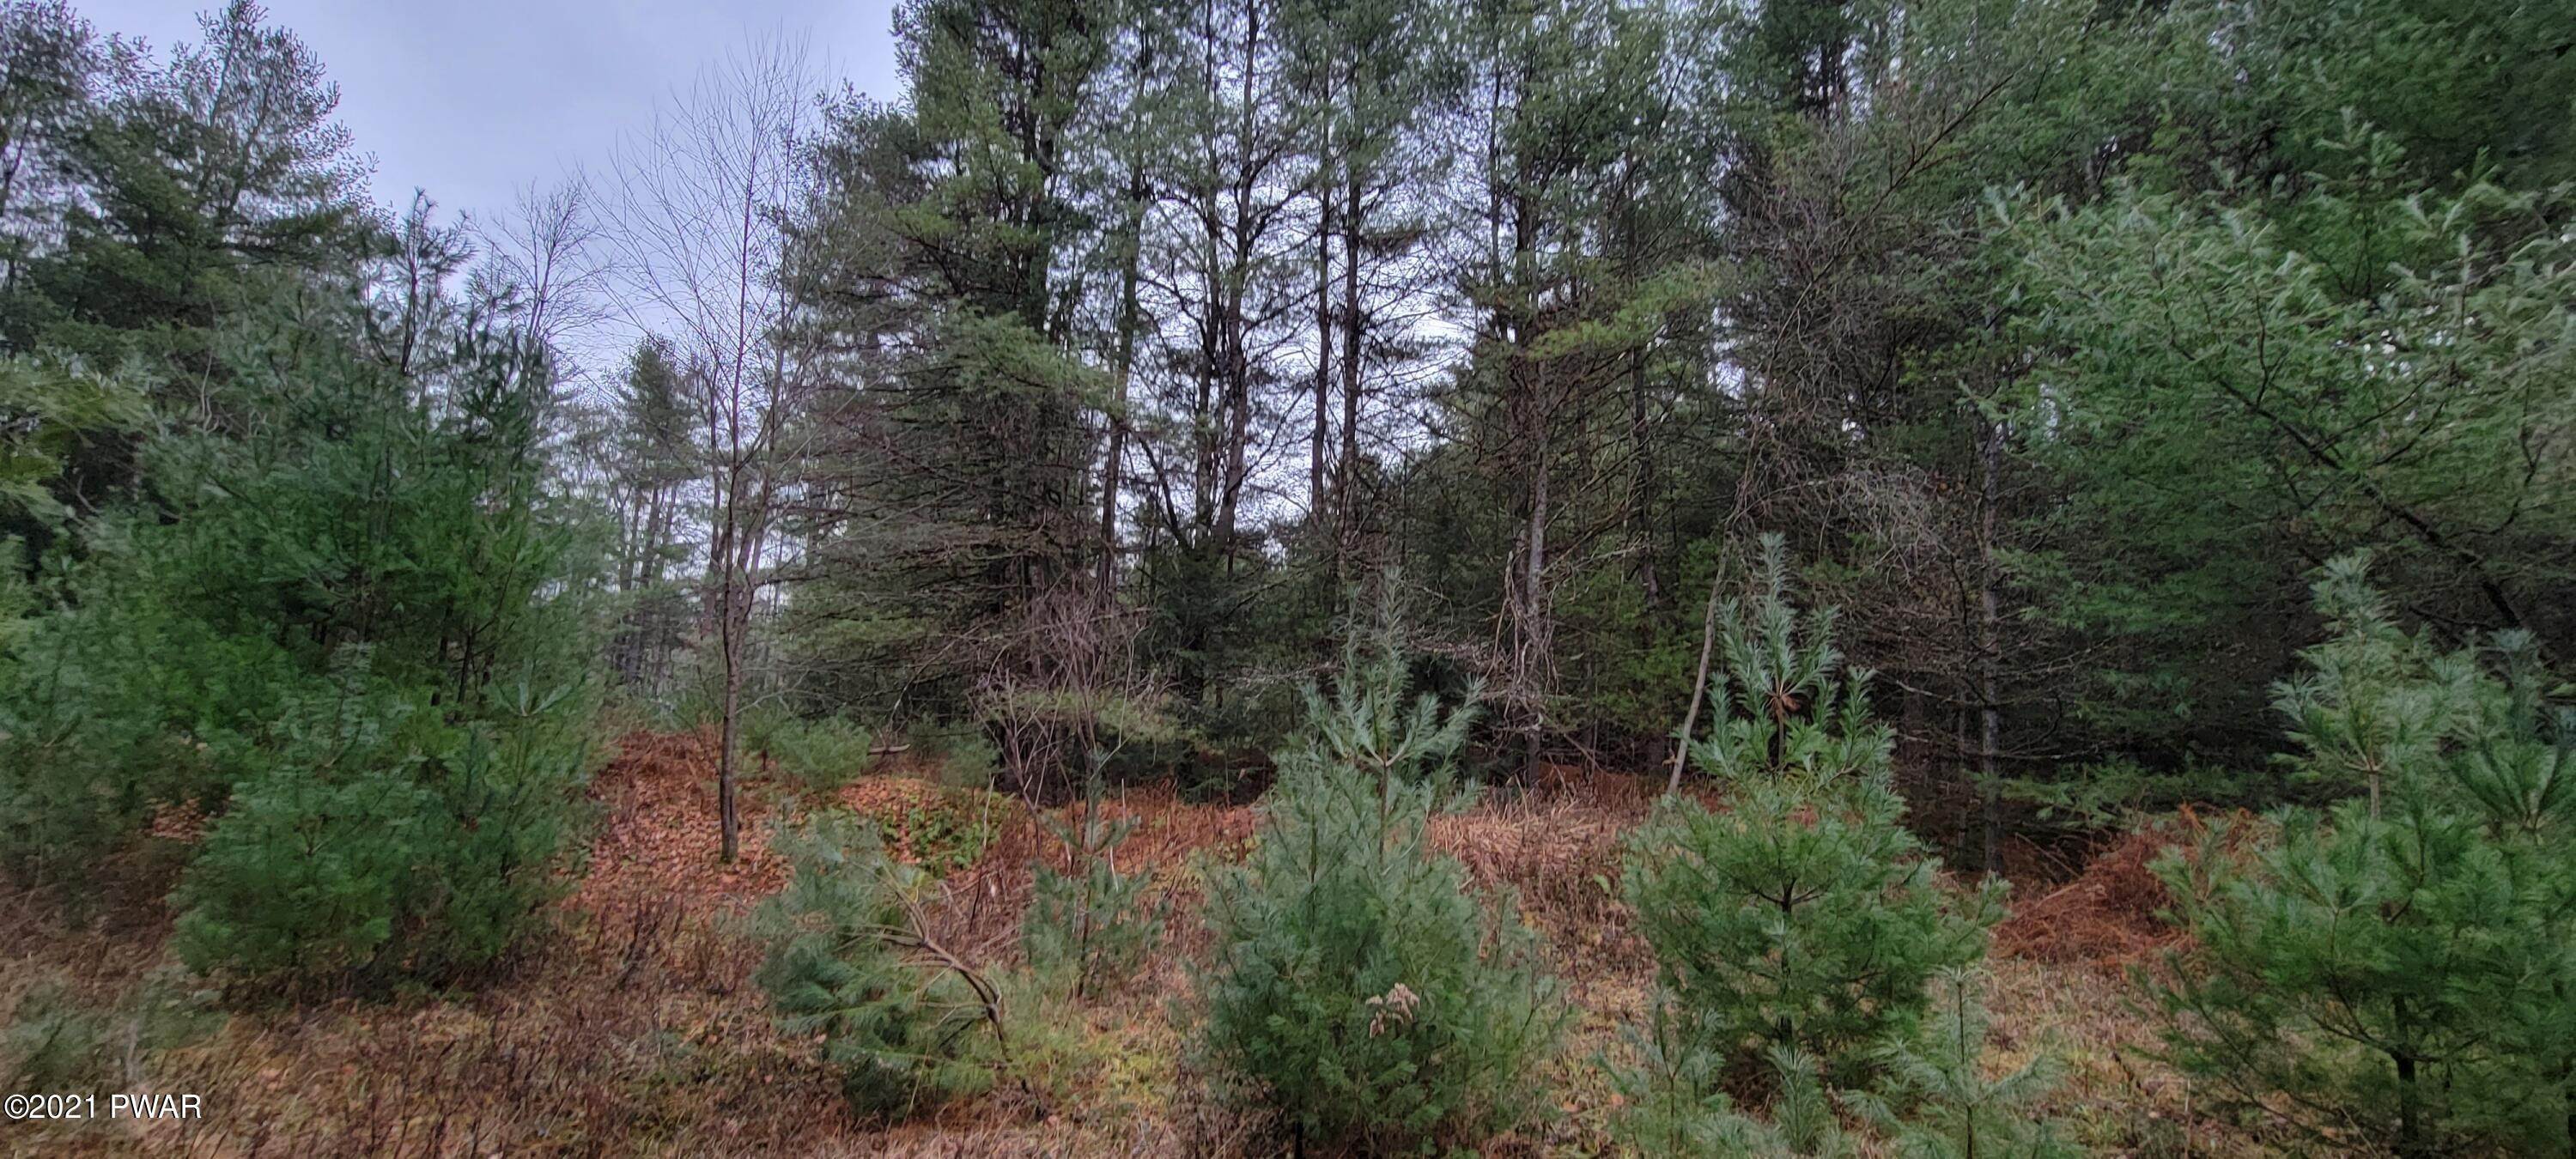 10. Land for Sale at Lot 43 Swamp Pond Rd Narrowsburg, New York 12764 United States